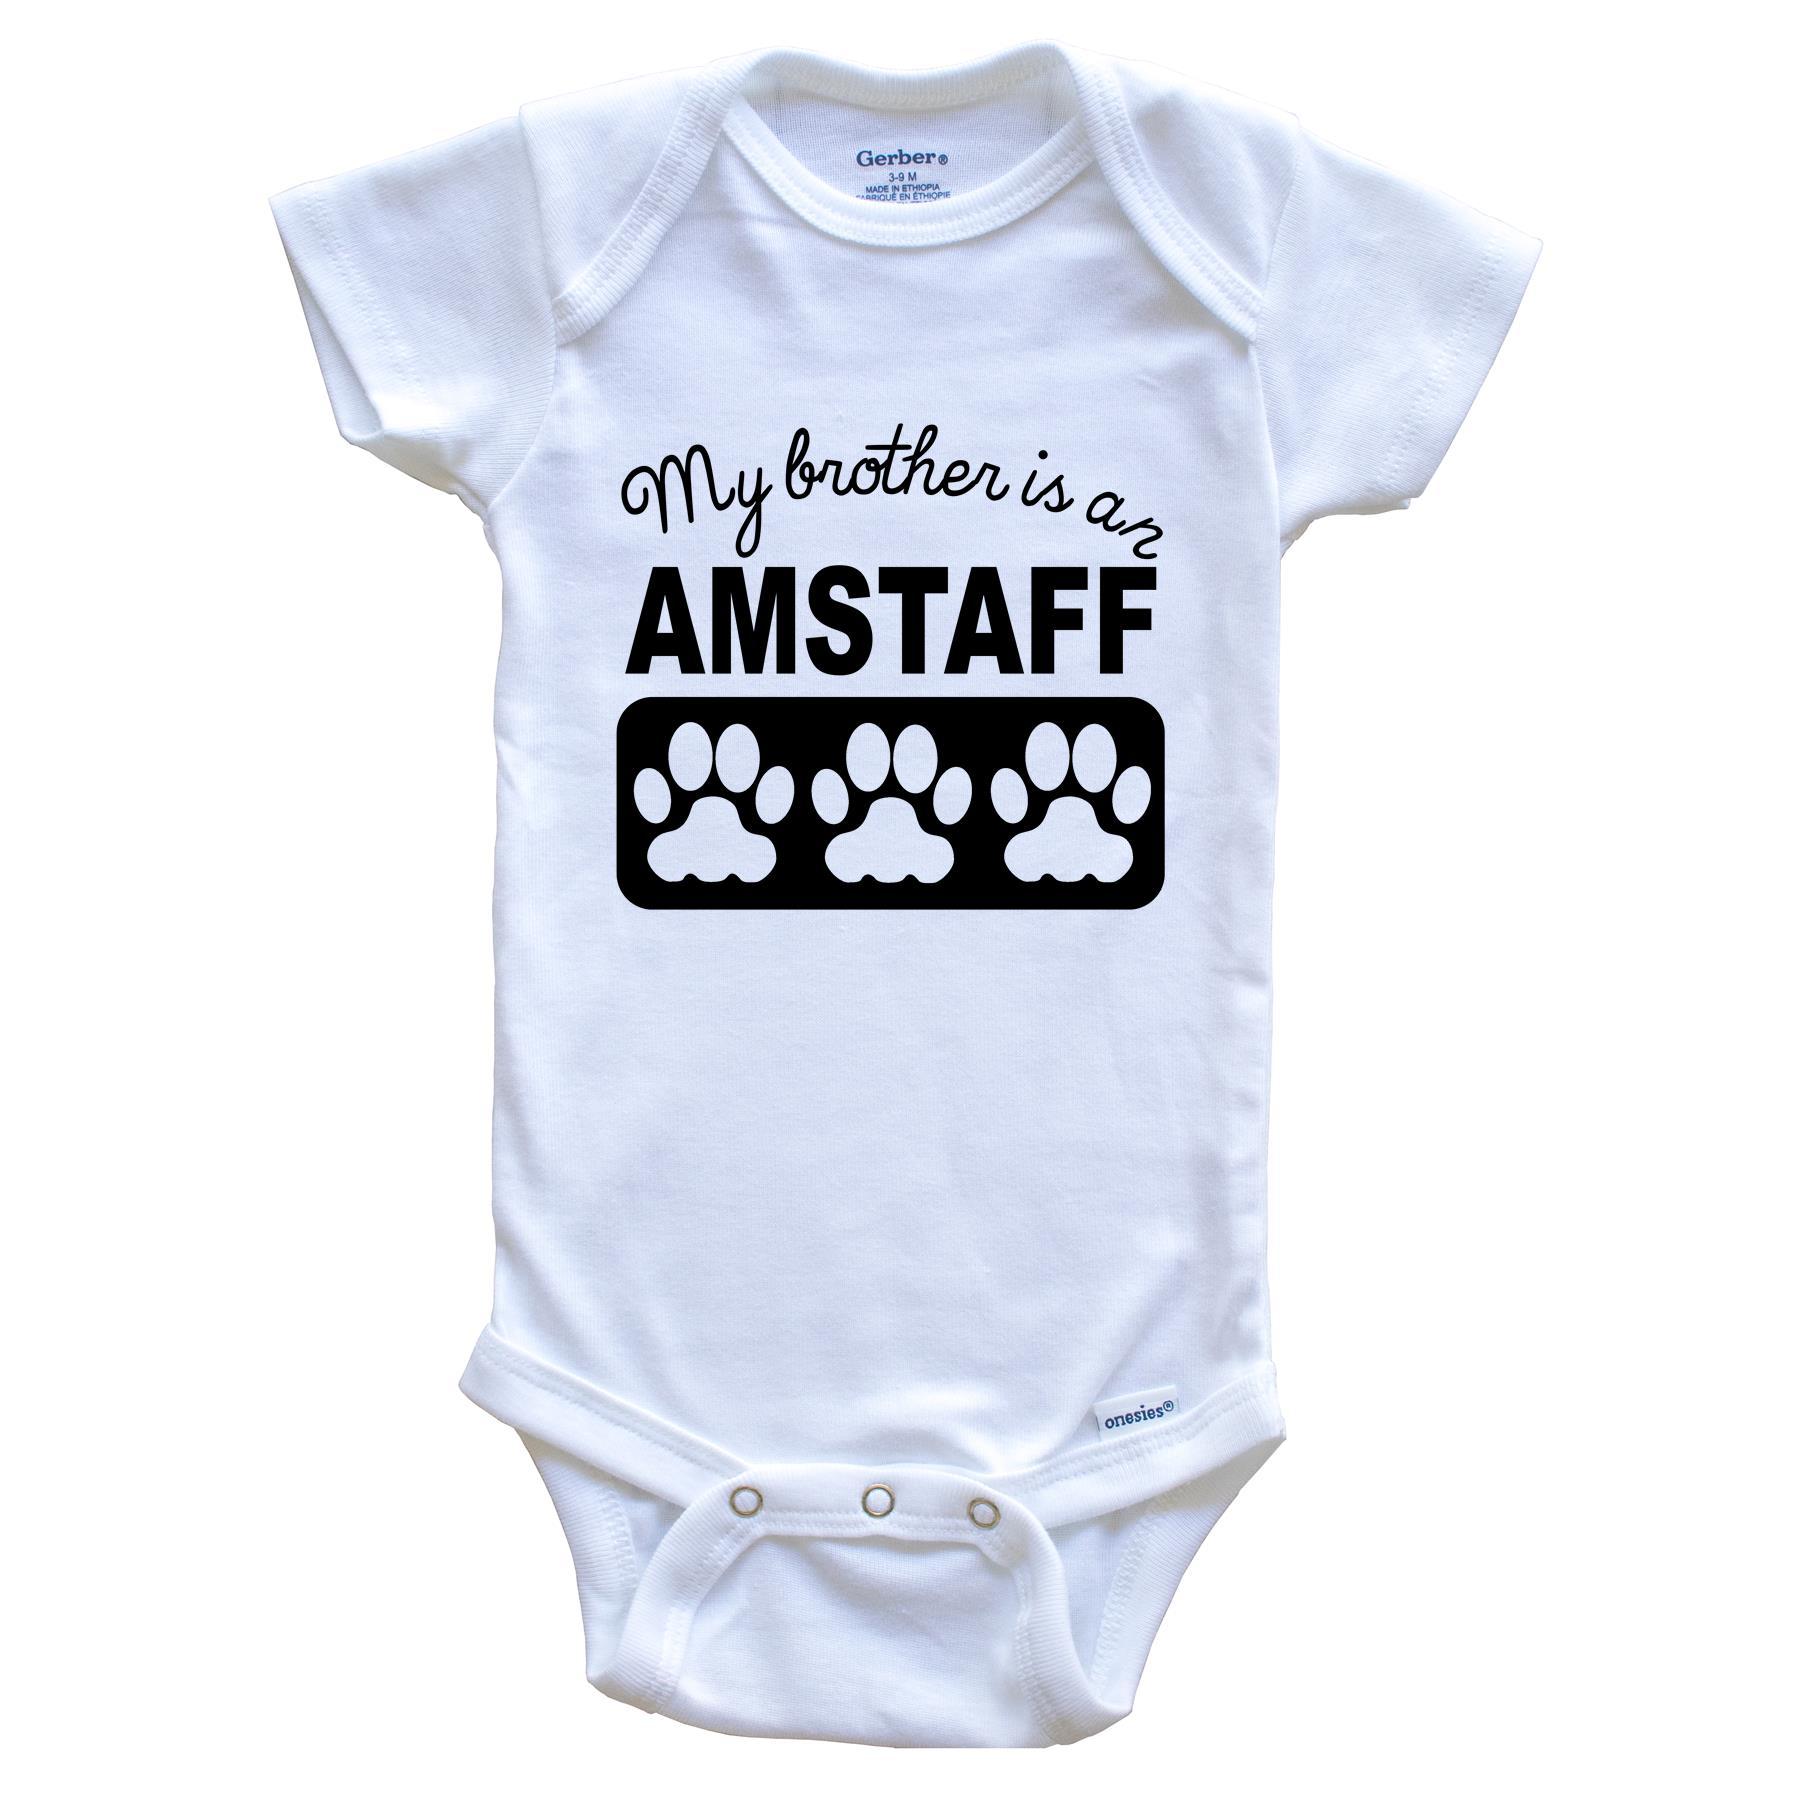 My Brother Is An AmStaff Baby Onesie